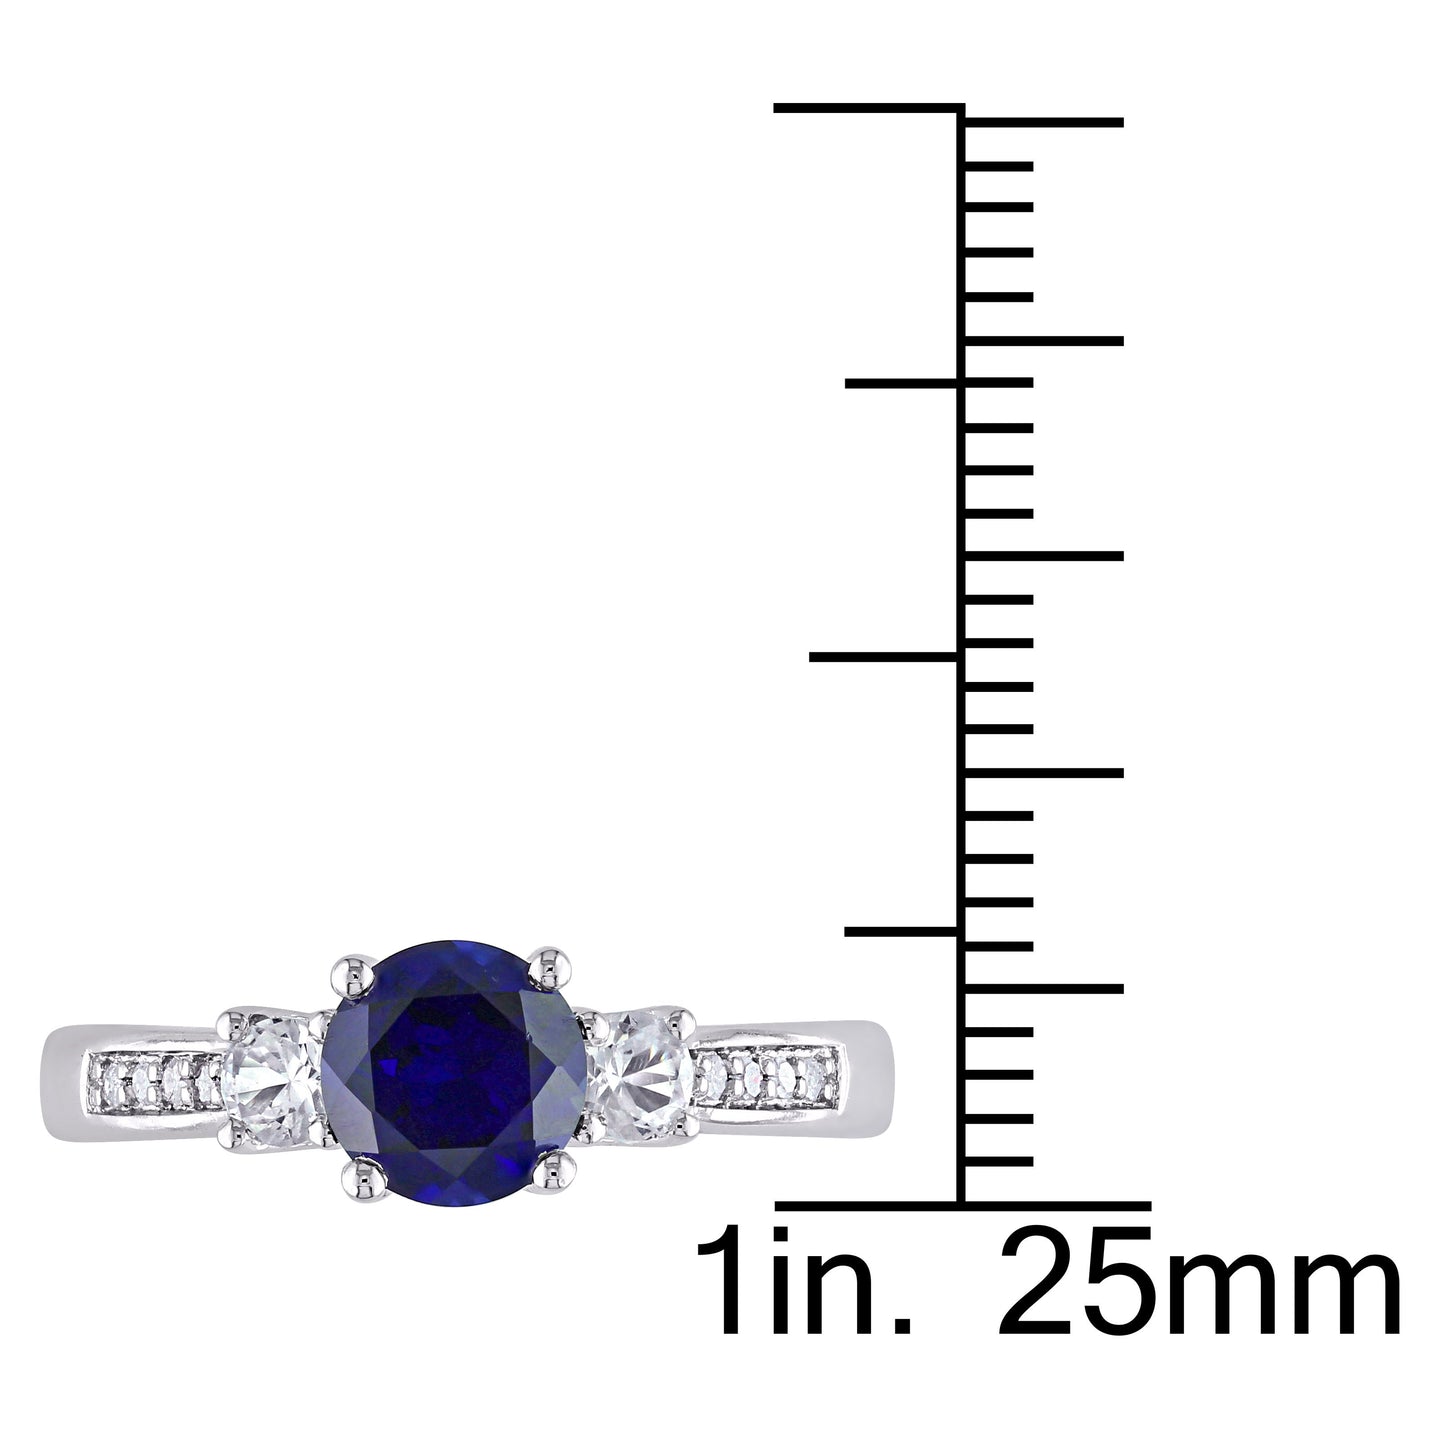 Blue & White Sapphire with Diamonds 3 Stone Ring in 10k White Gold